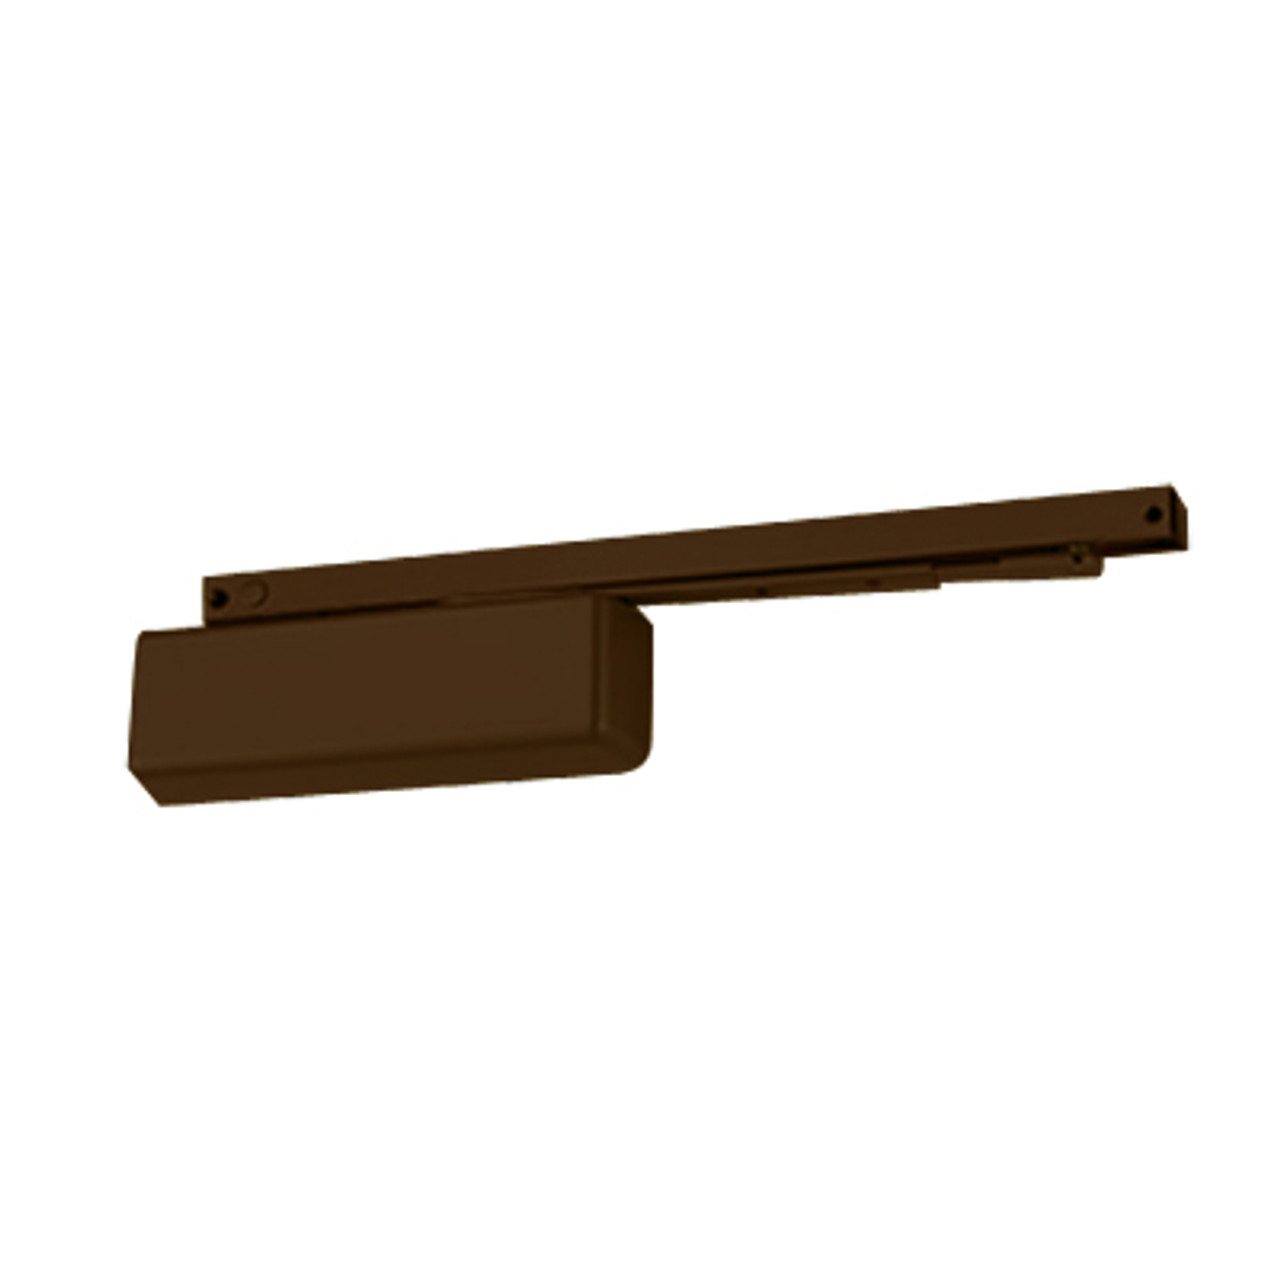 3133SE-LONG-RH-24V-AC/DC-US10B LCN Door Closer with Long Arm in Oil Rubbed Bronze Finish